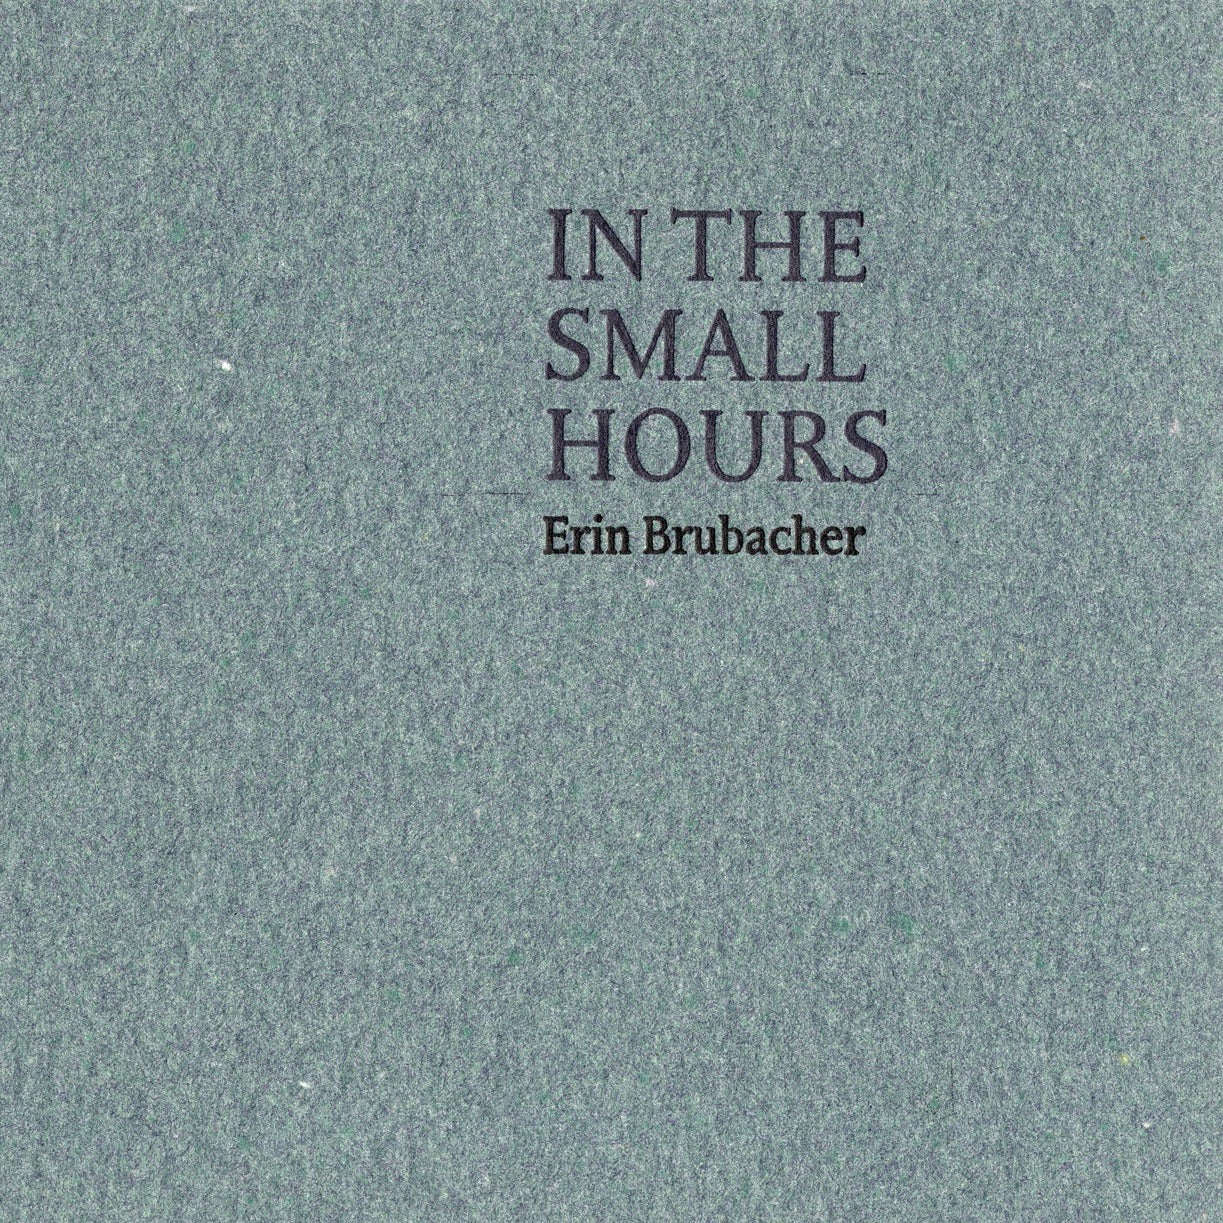 Erin Brubacher book of poems "In The Small Hours" available at Easy Tiger Toronto